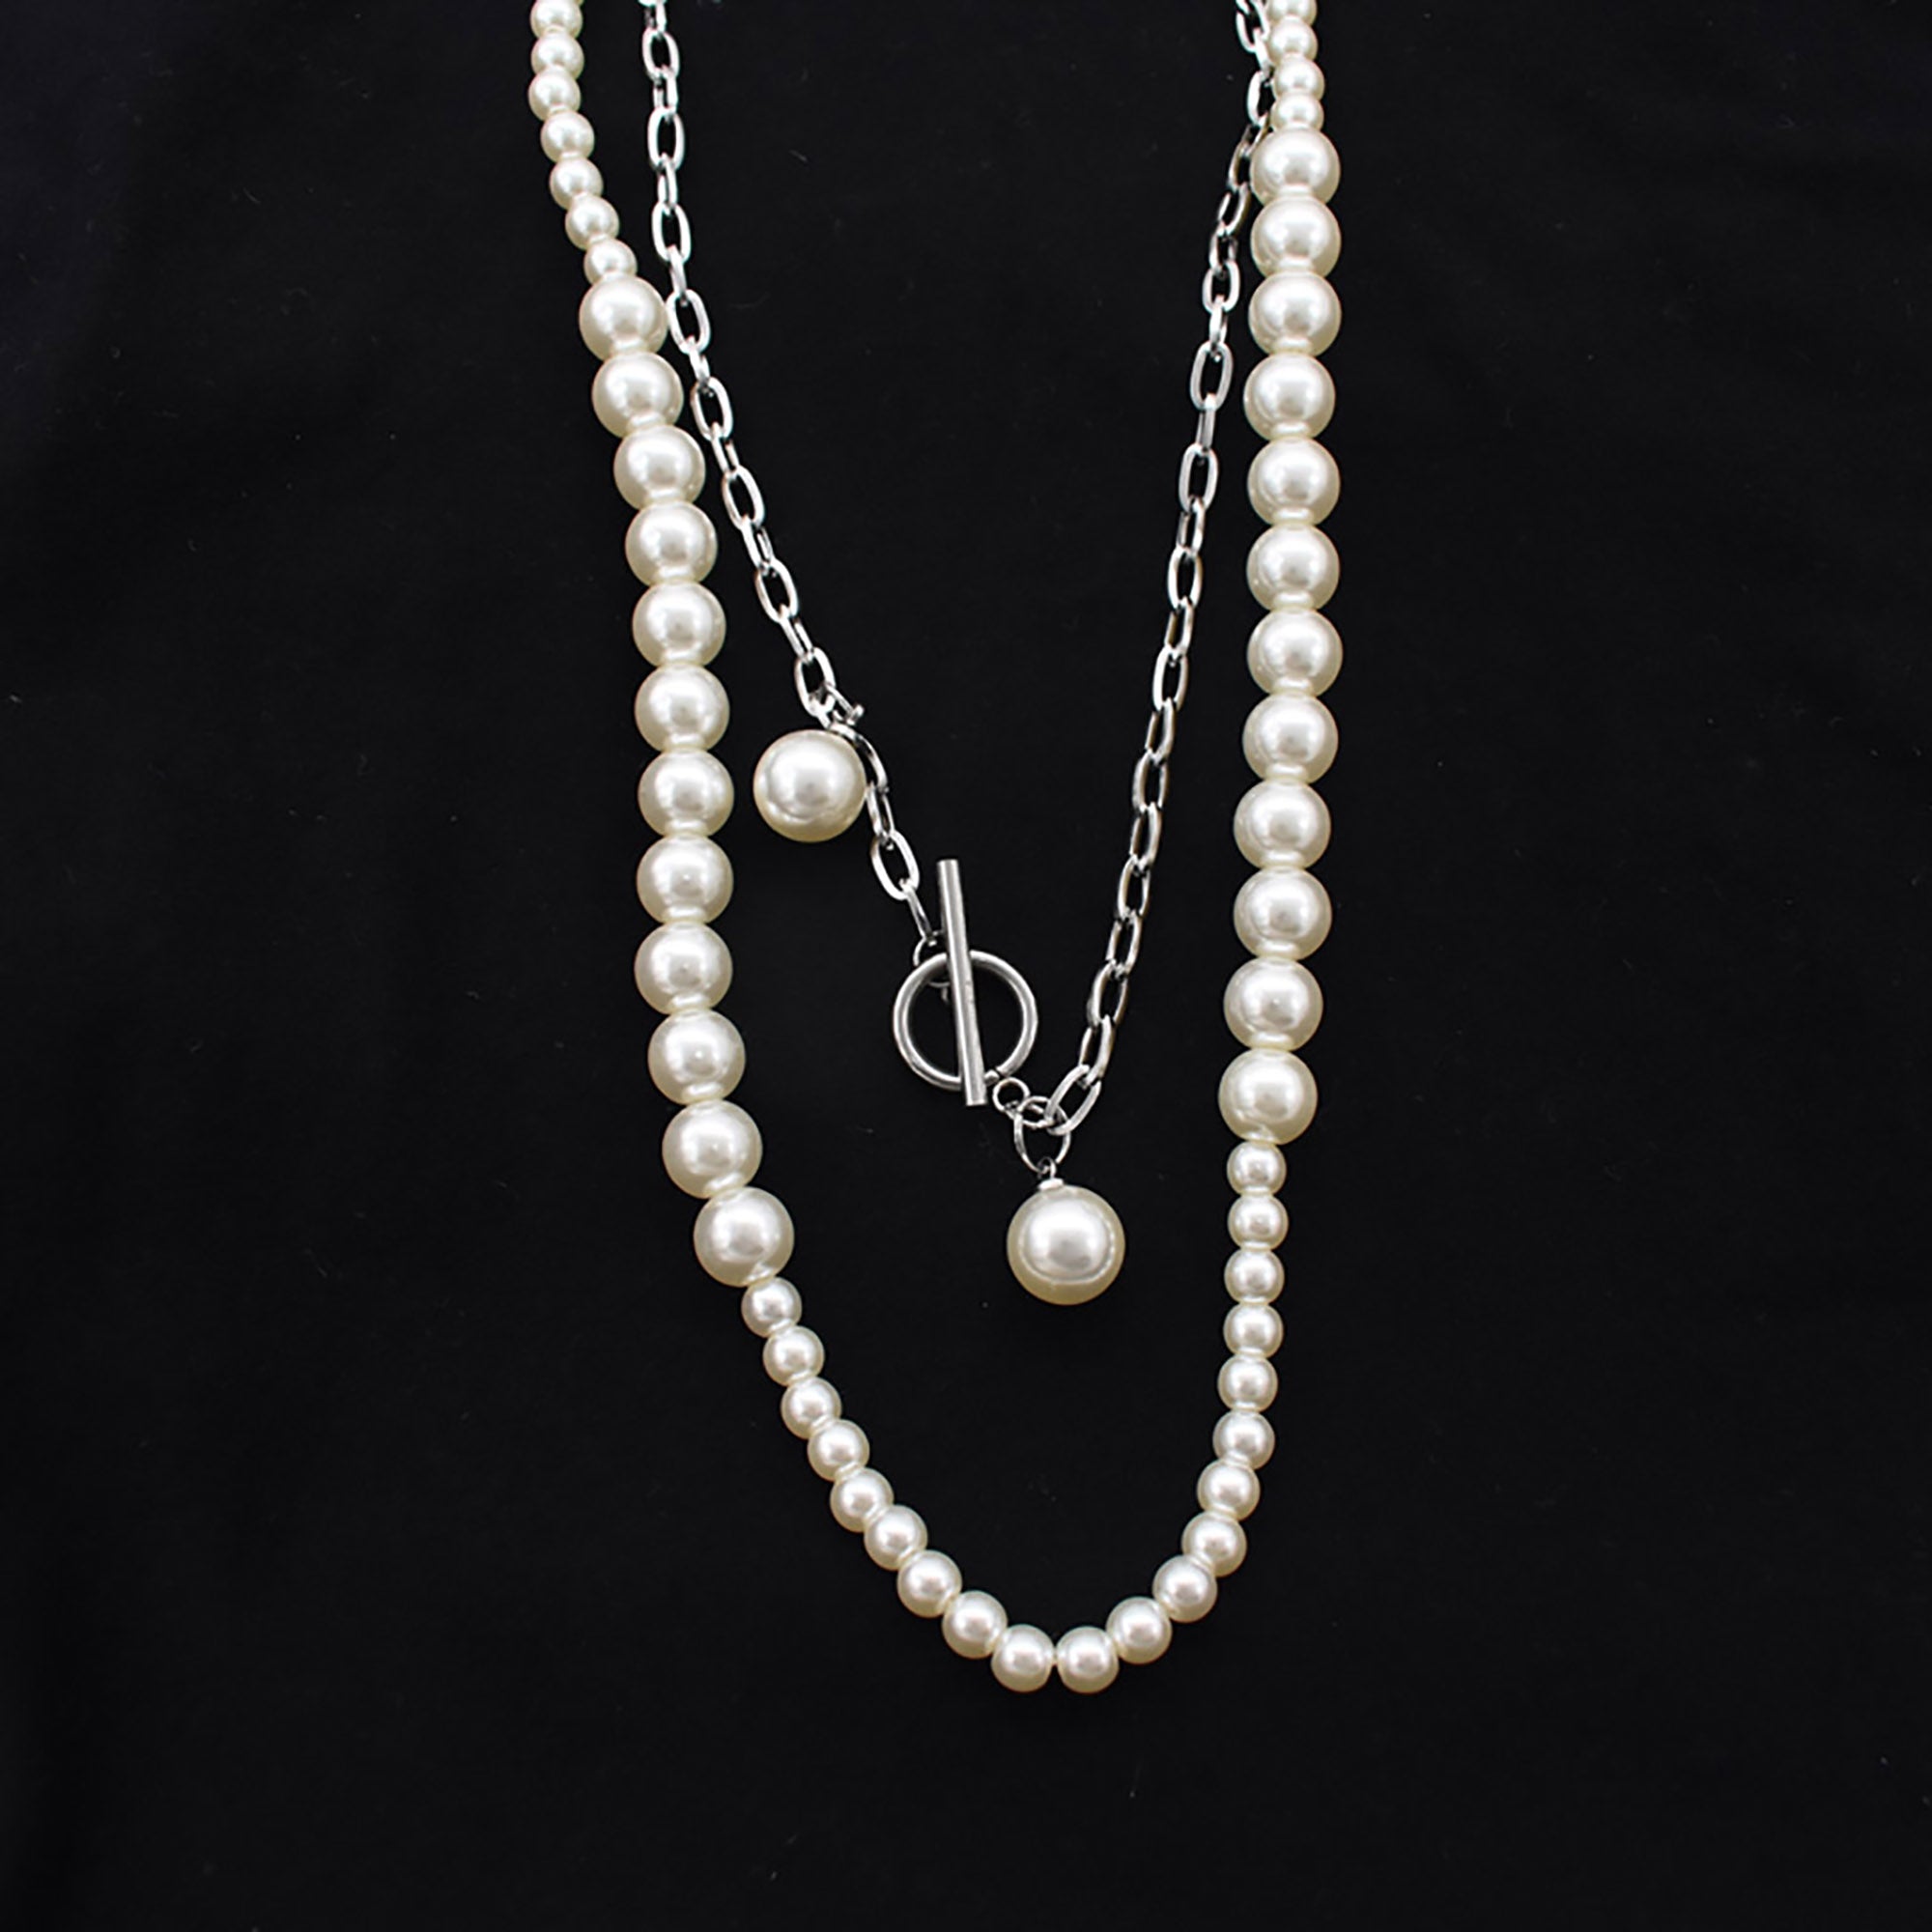 2 in 1 Set Stainless Steel  w/ Pearl Pendant Layered Necklace Valentine Day Gift KOL / Youtuber / Celebrity / Fashion Icon styling